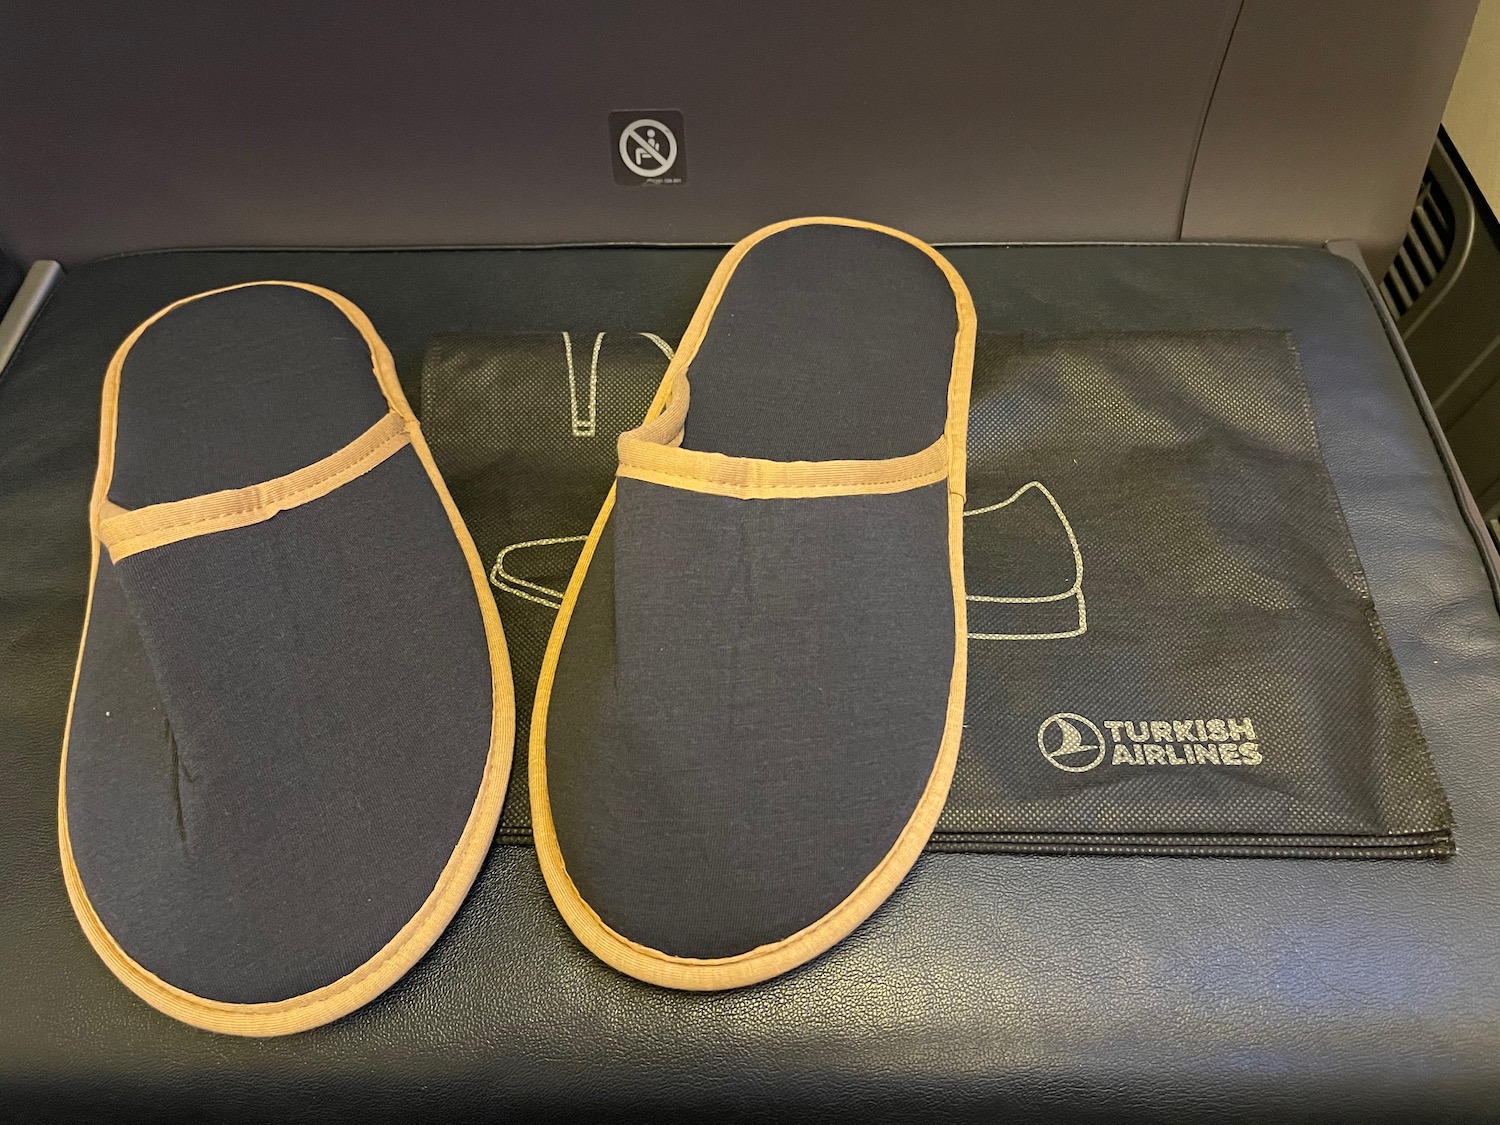 a pair of slippers on a black surface